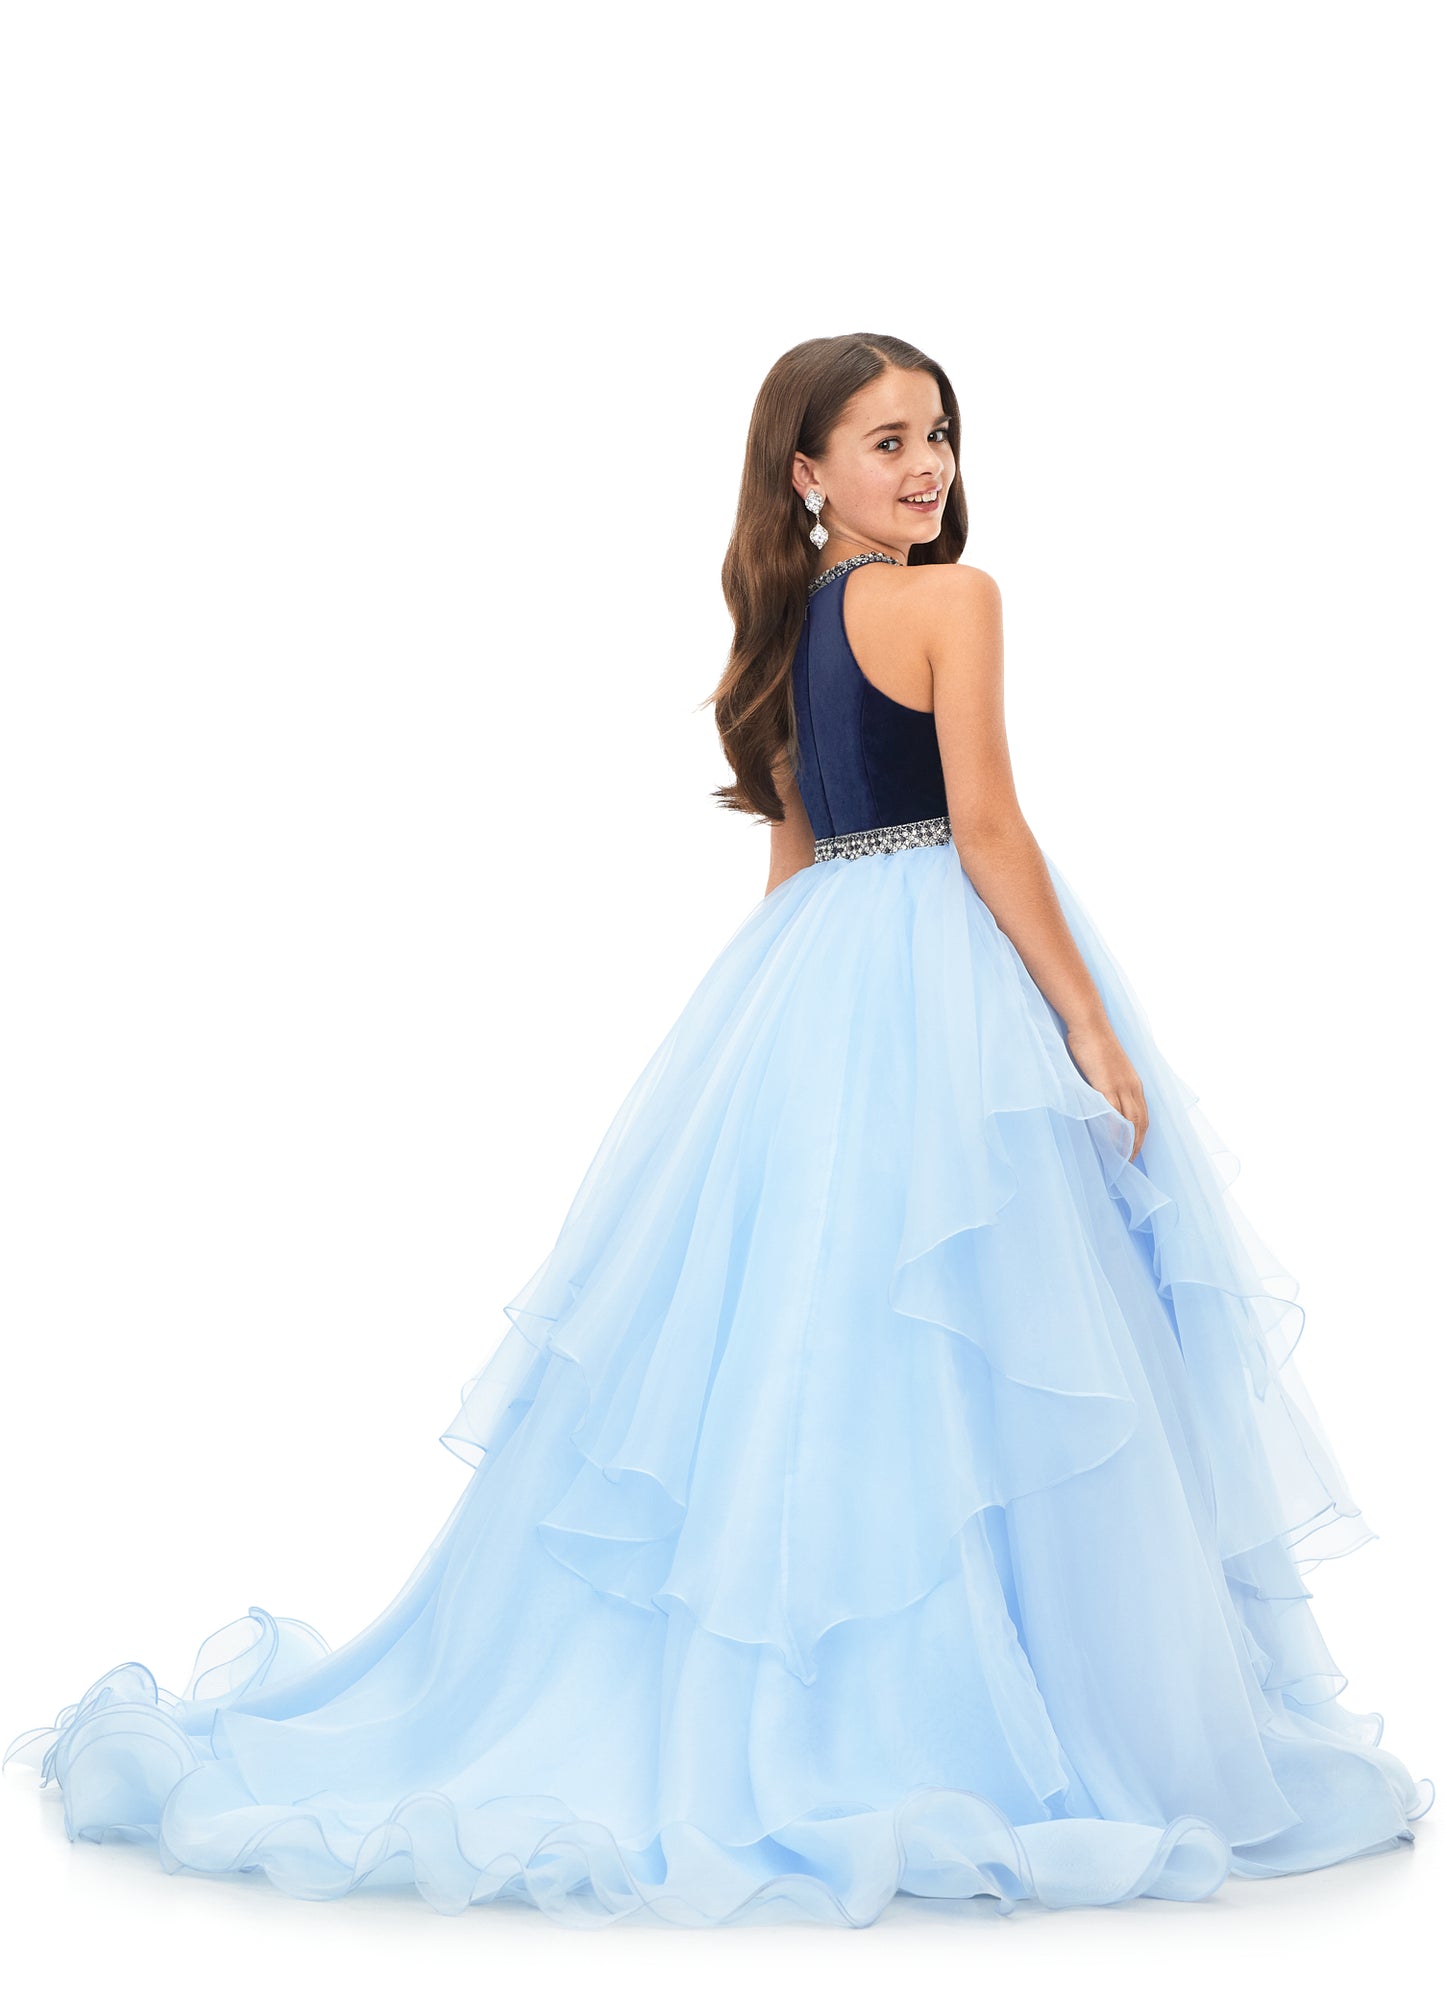 Ashley Lauren Kids 8179 Girls Halter Ball Gown Pageant Dress with Handkerchief Skirt   This kids halter style ball gown is accented with a velvet bodice. The neckline and waistline are embellished with crystal details. The full organza handkerchief style skirt is sure to wow!